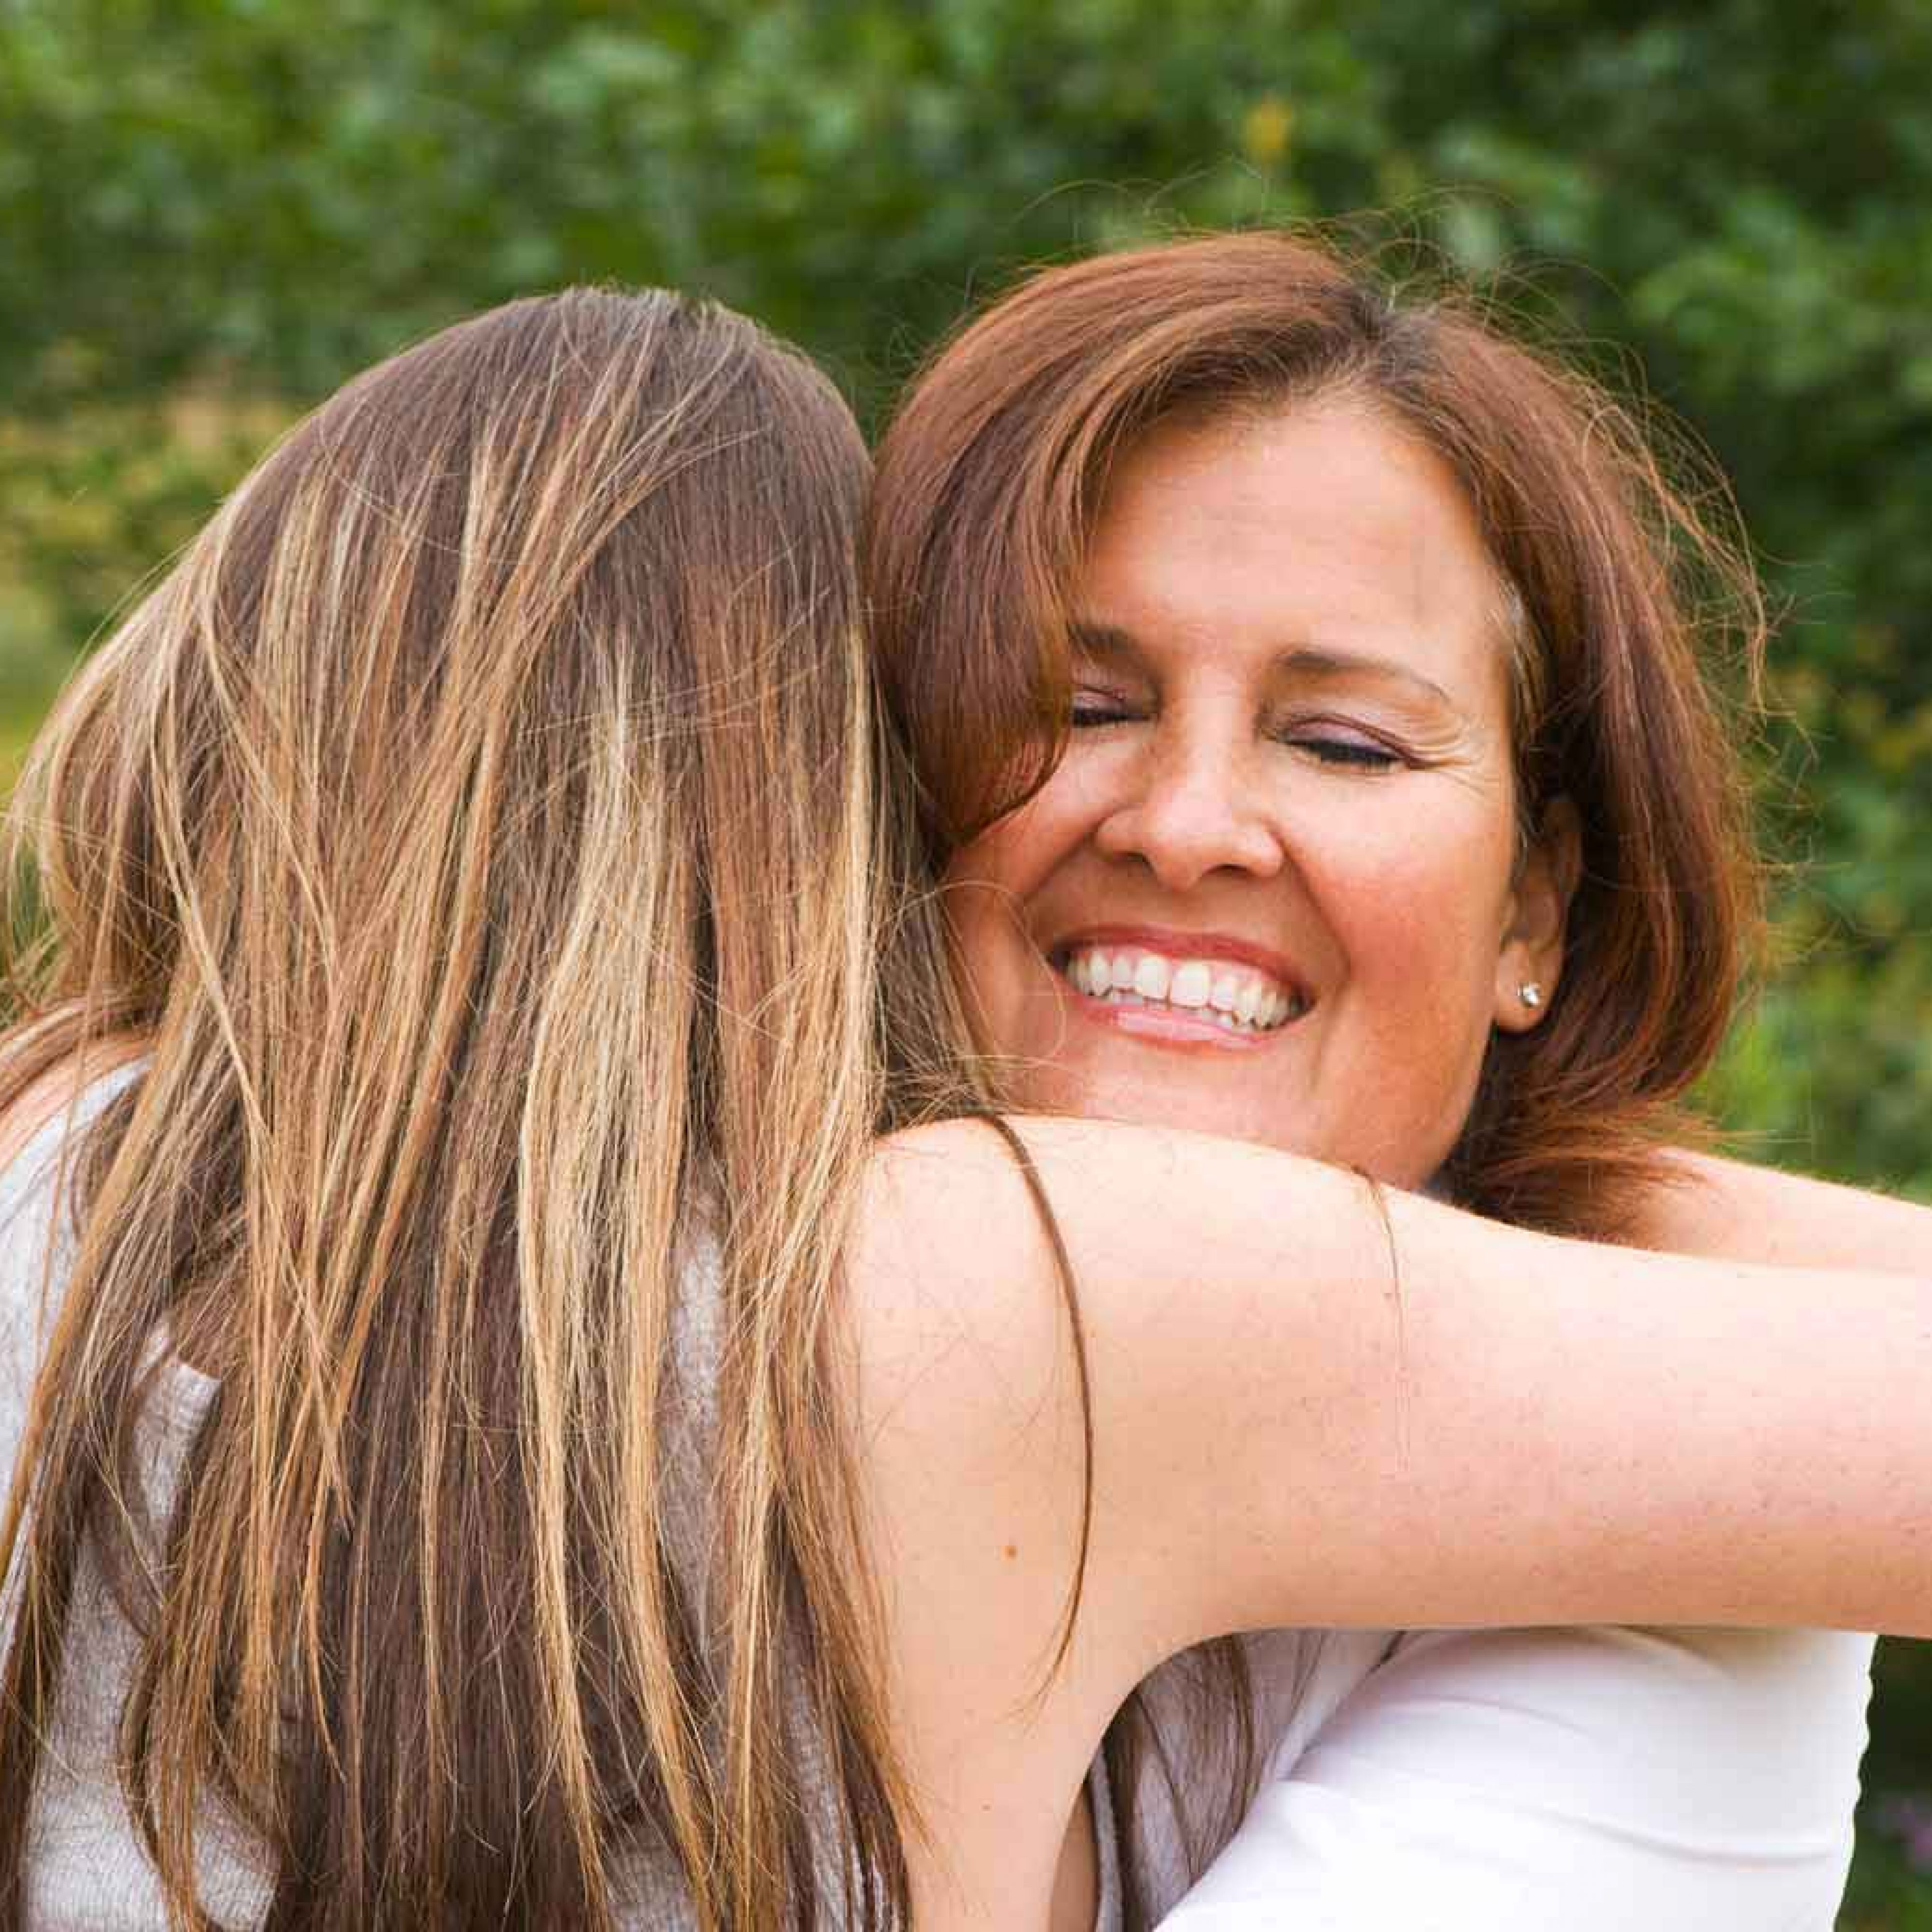 Sending-Your-Kids-to-College—Separation-Anxiety-or-Blissful-Freedom-